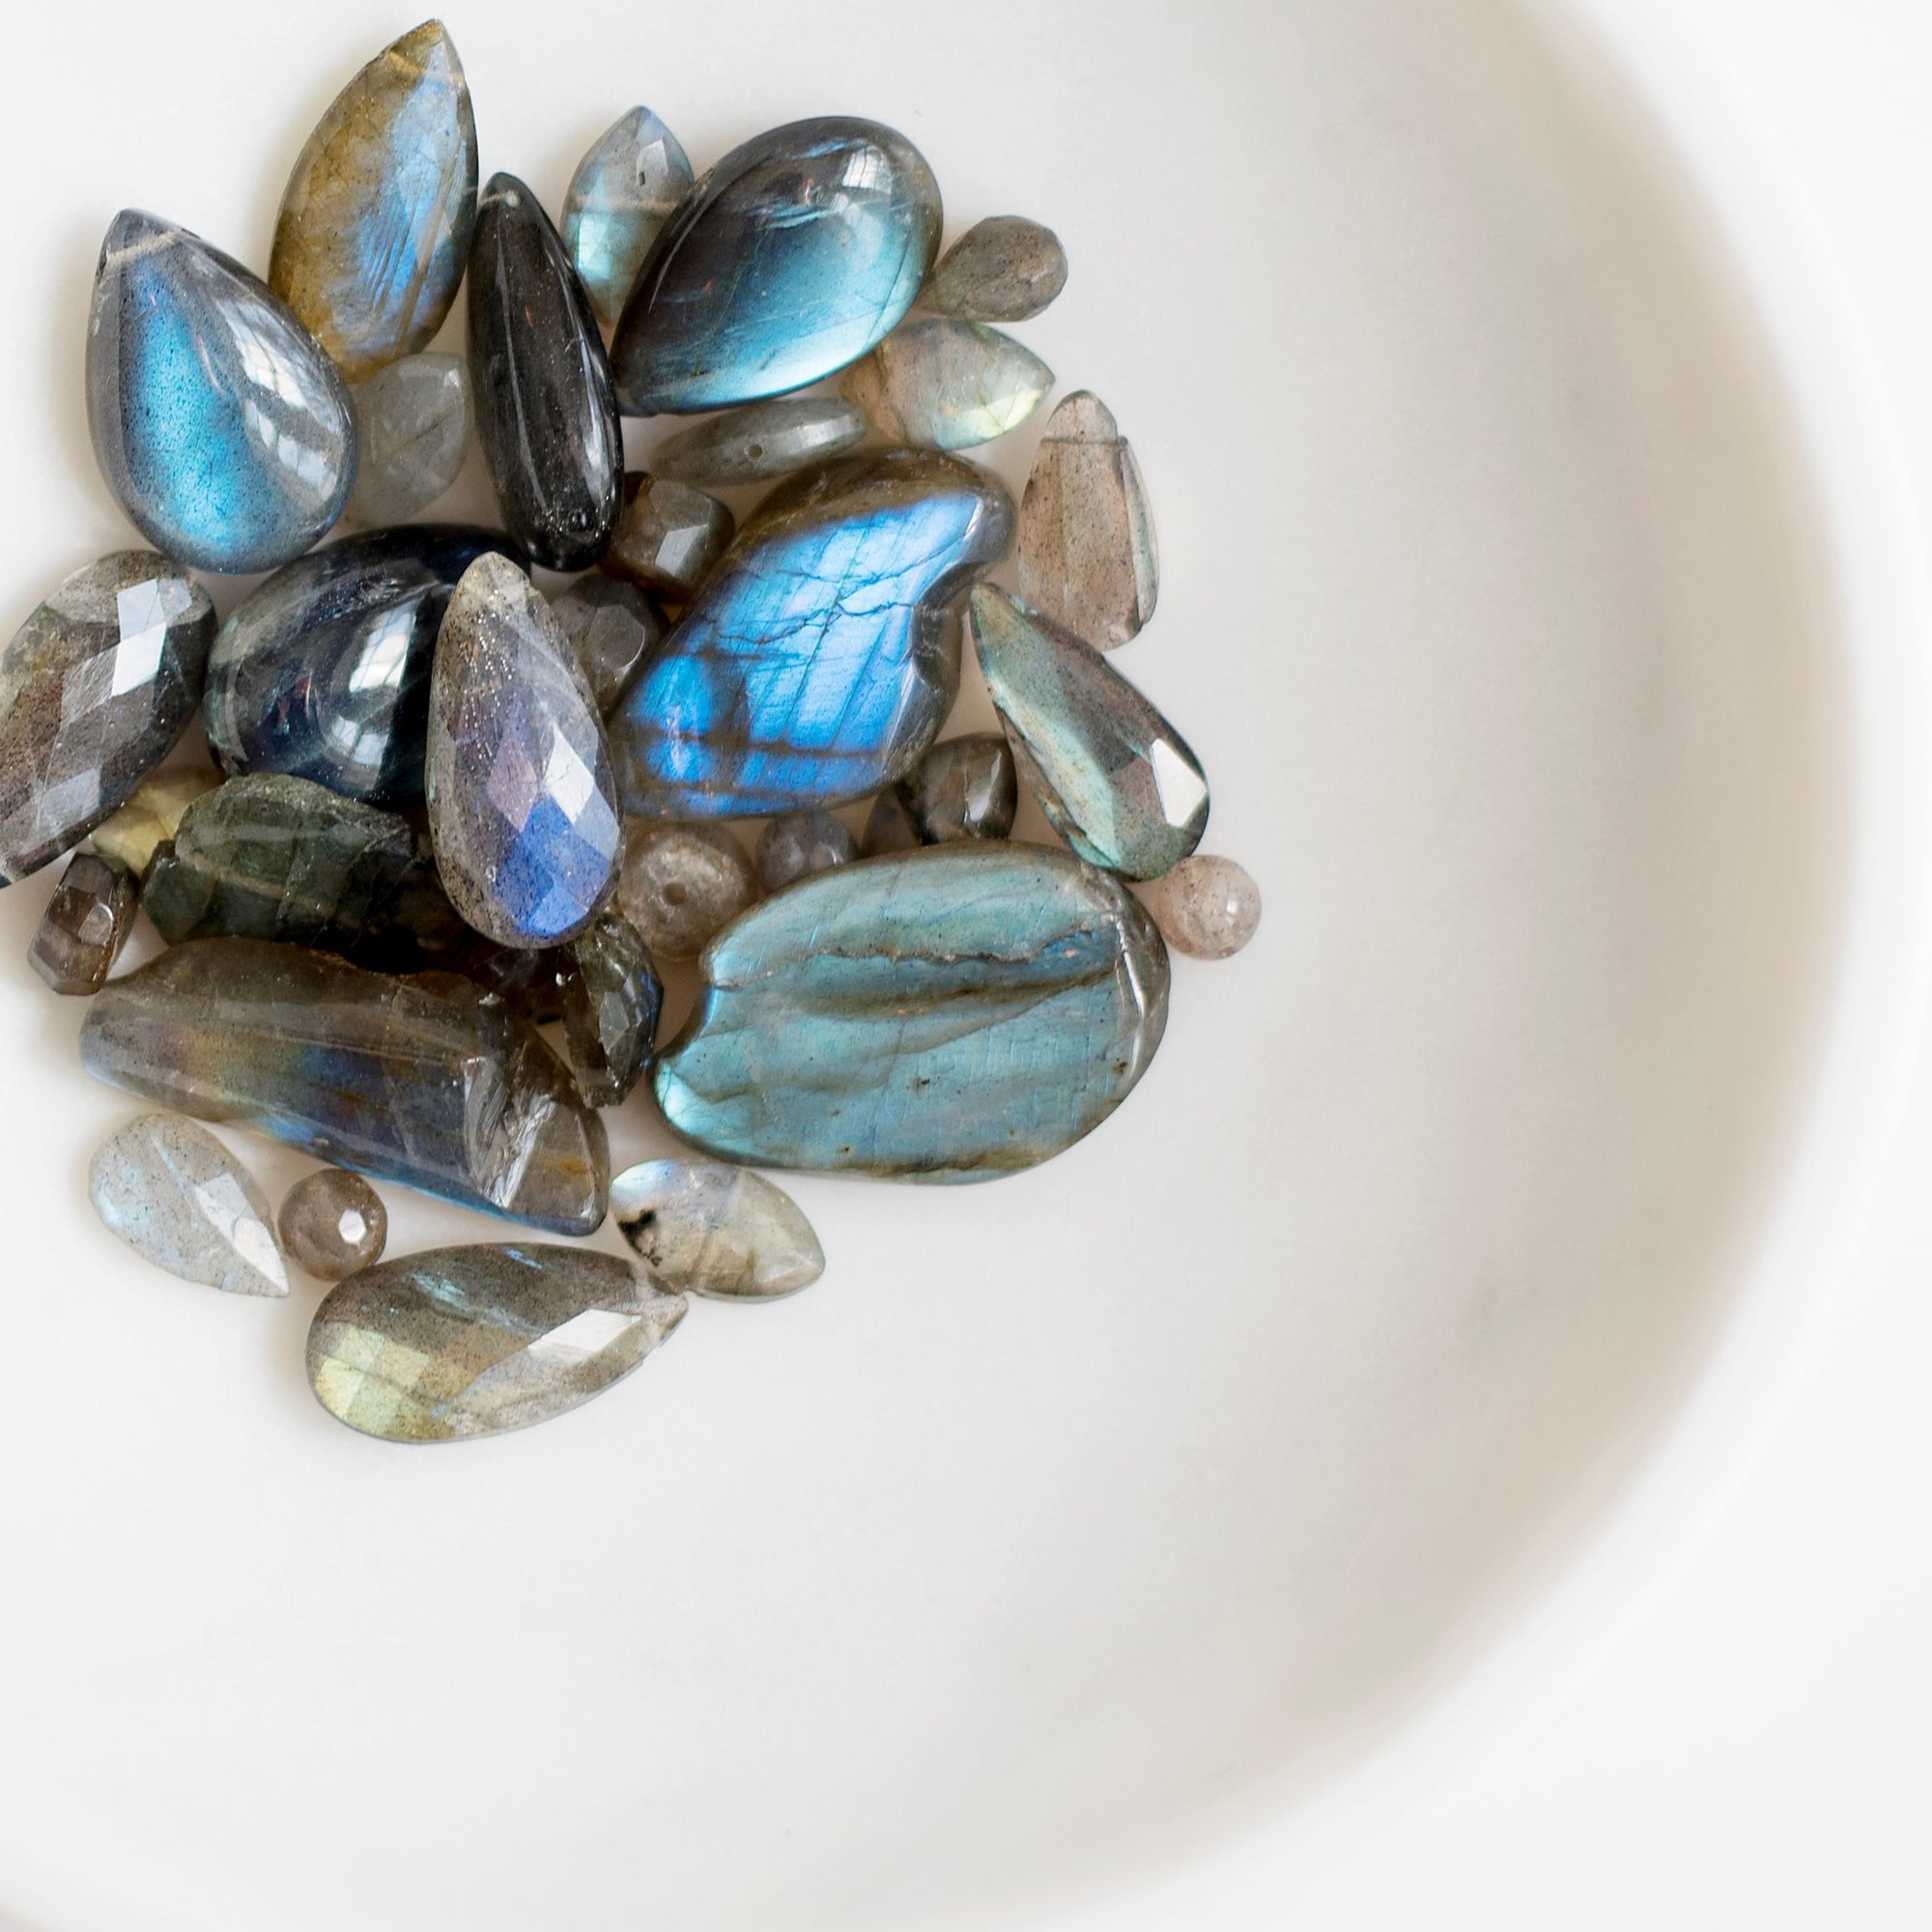 Labradorite True to its origins in the northern Canadian wilderness of Labrador, this stone entrances admirers with the deep blues, brilliant aquas, flashing greens, and golds of the Aurora Borealis. Its ever-shifting colors make labradorite well-known as